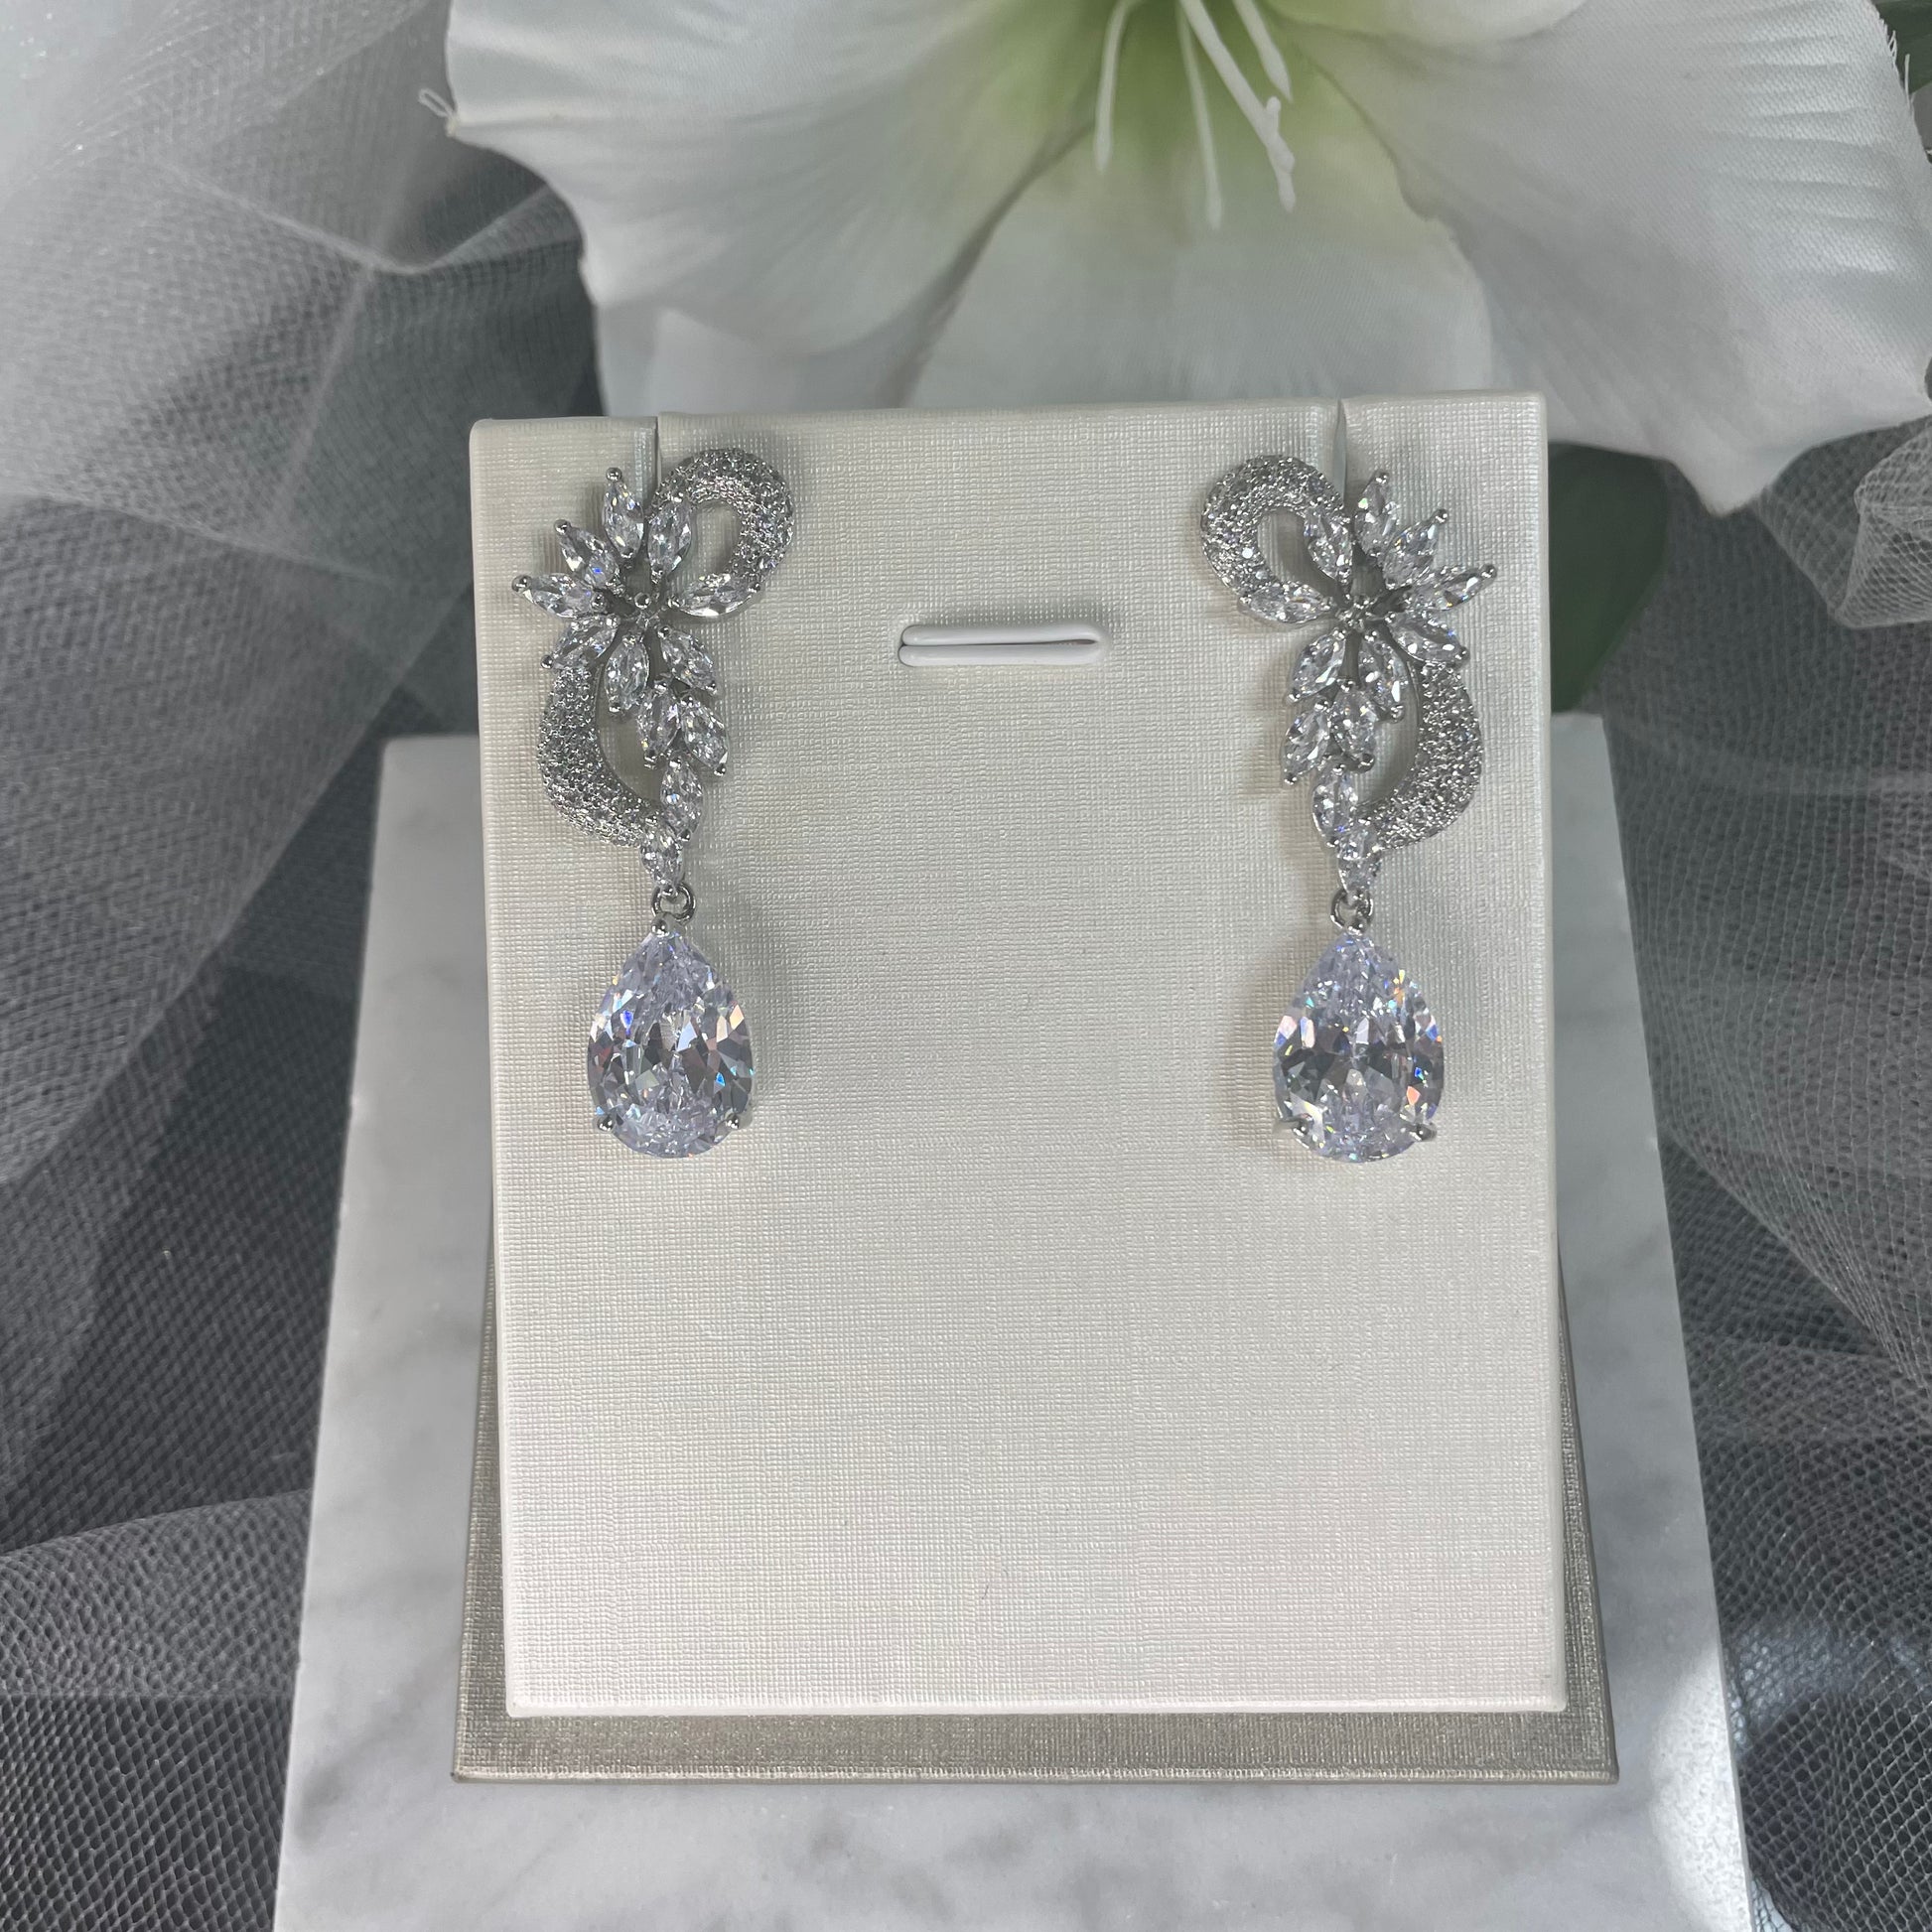 Vintage Style Silver Drop Earrings from Ava Bridal Collection - Divine Bridal